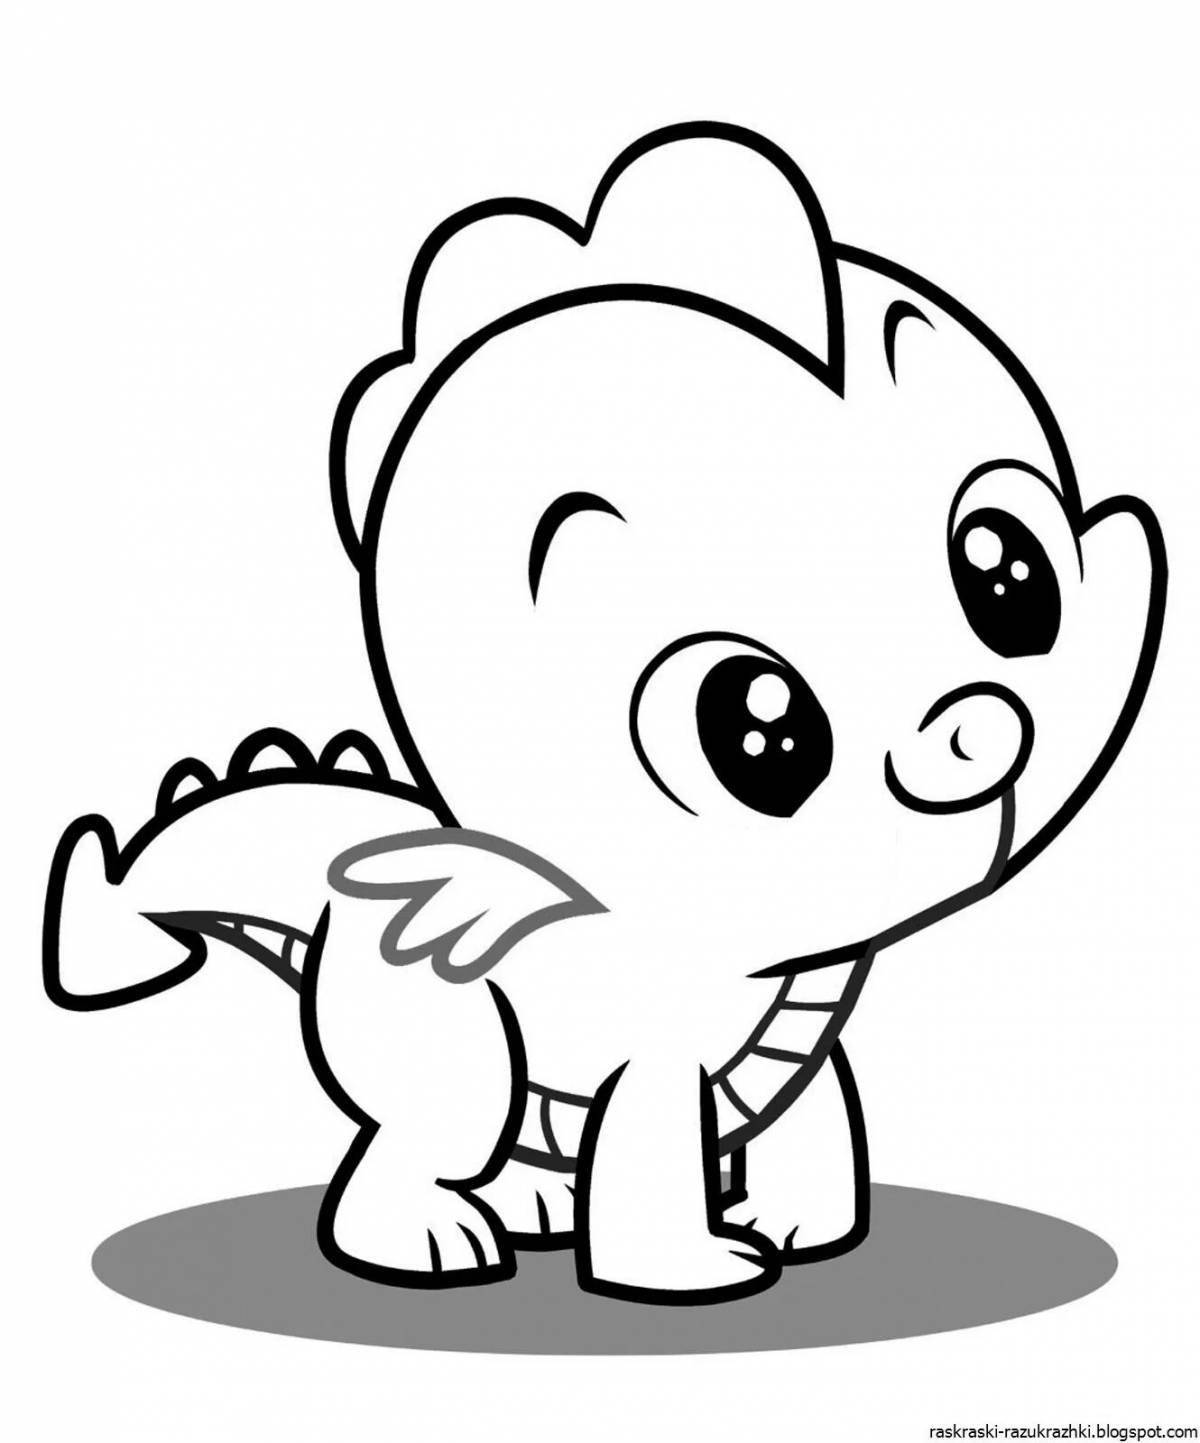 Spicy coloring pages cute little animals